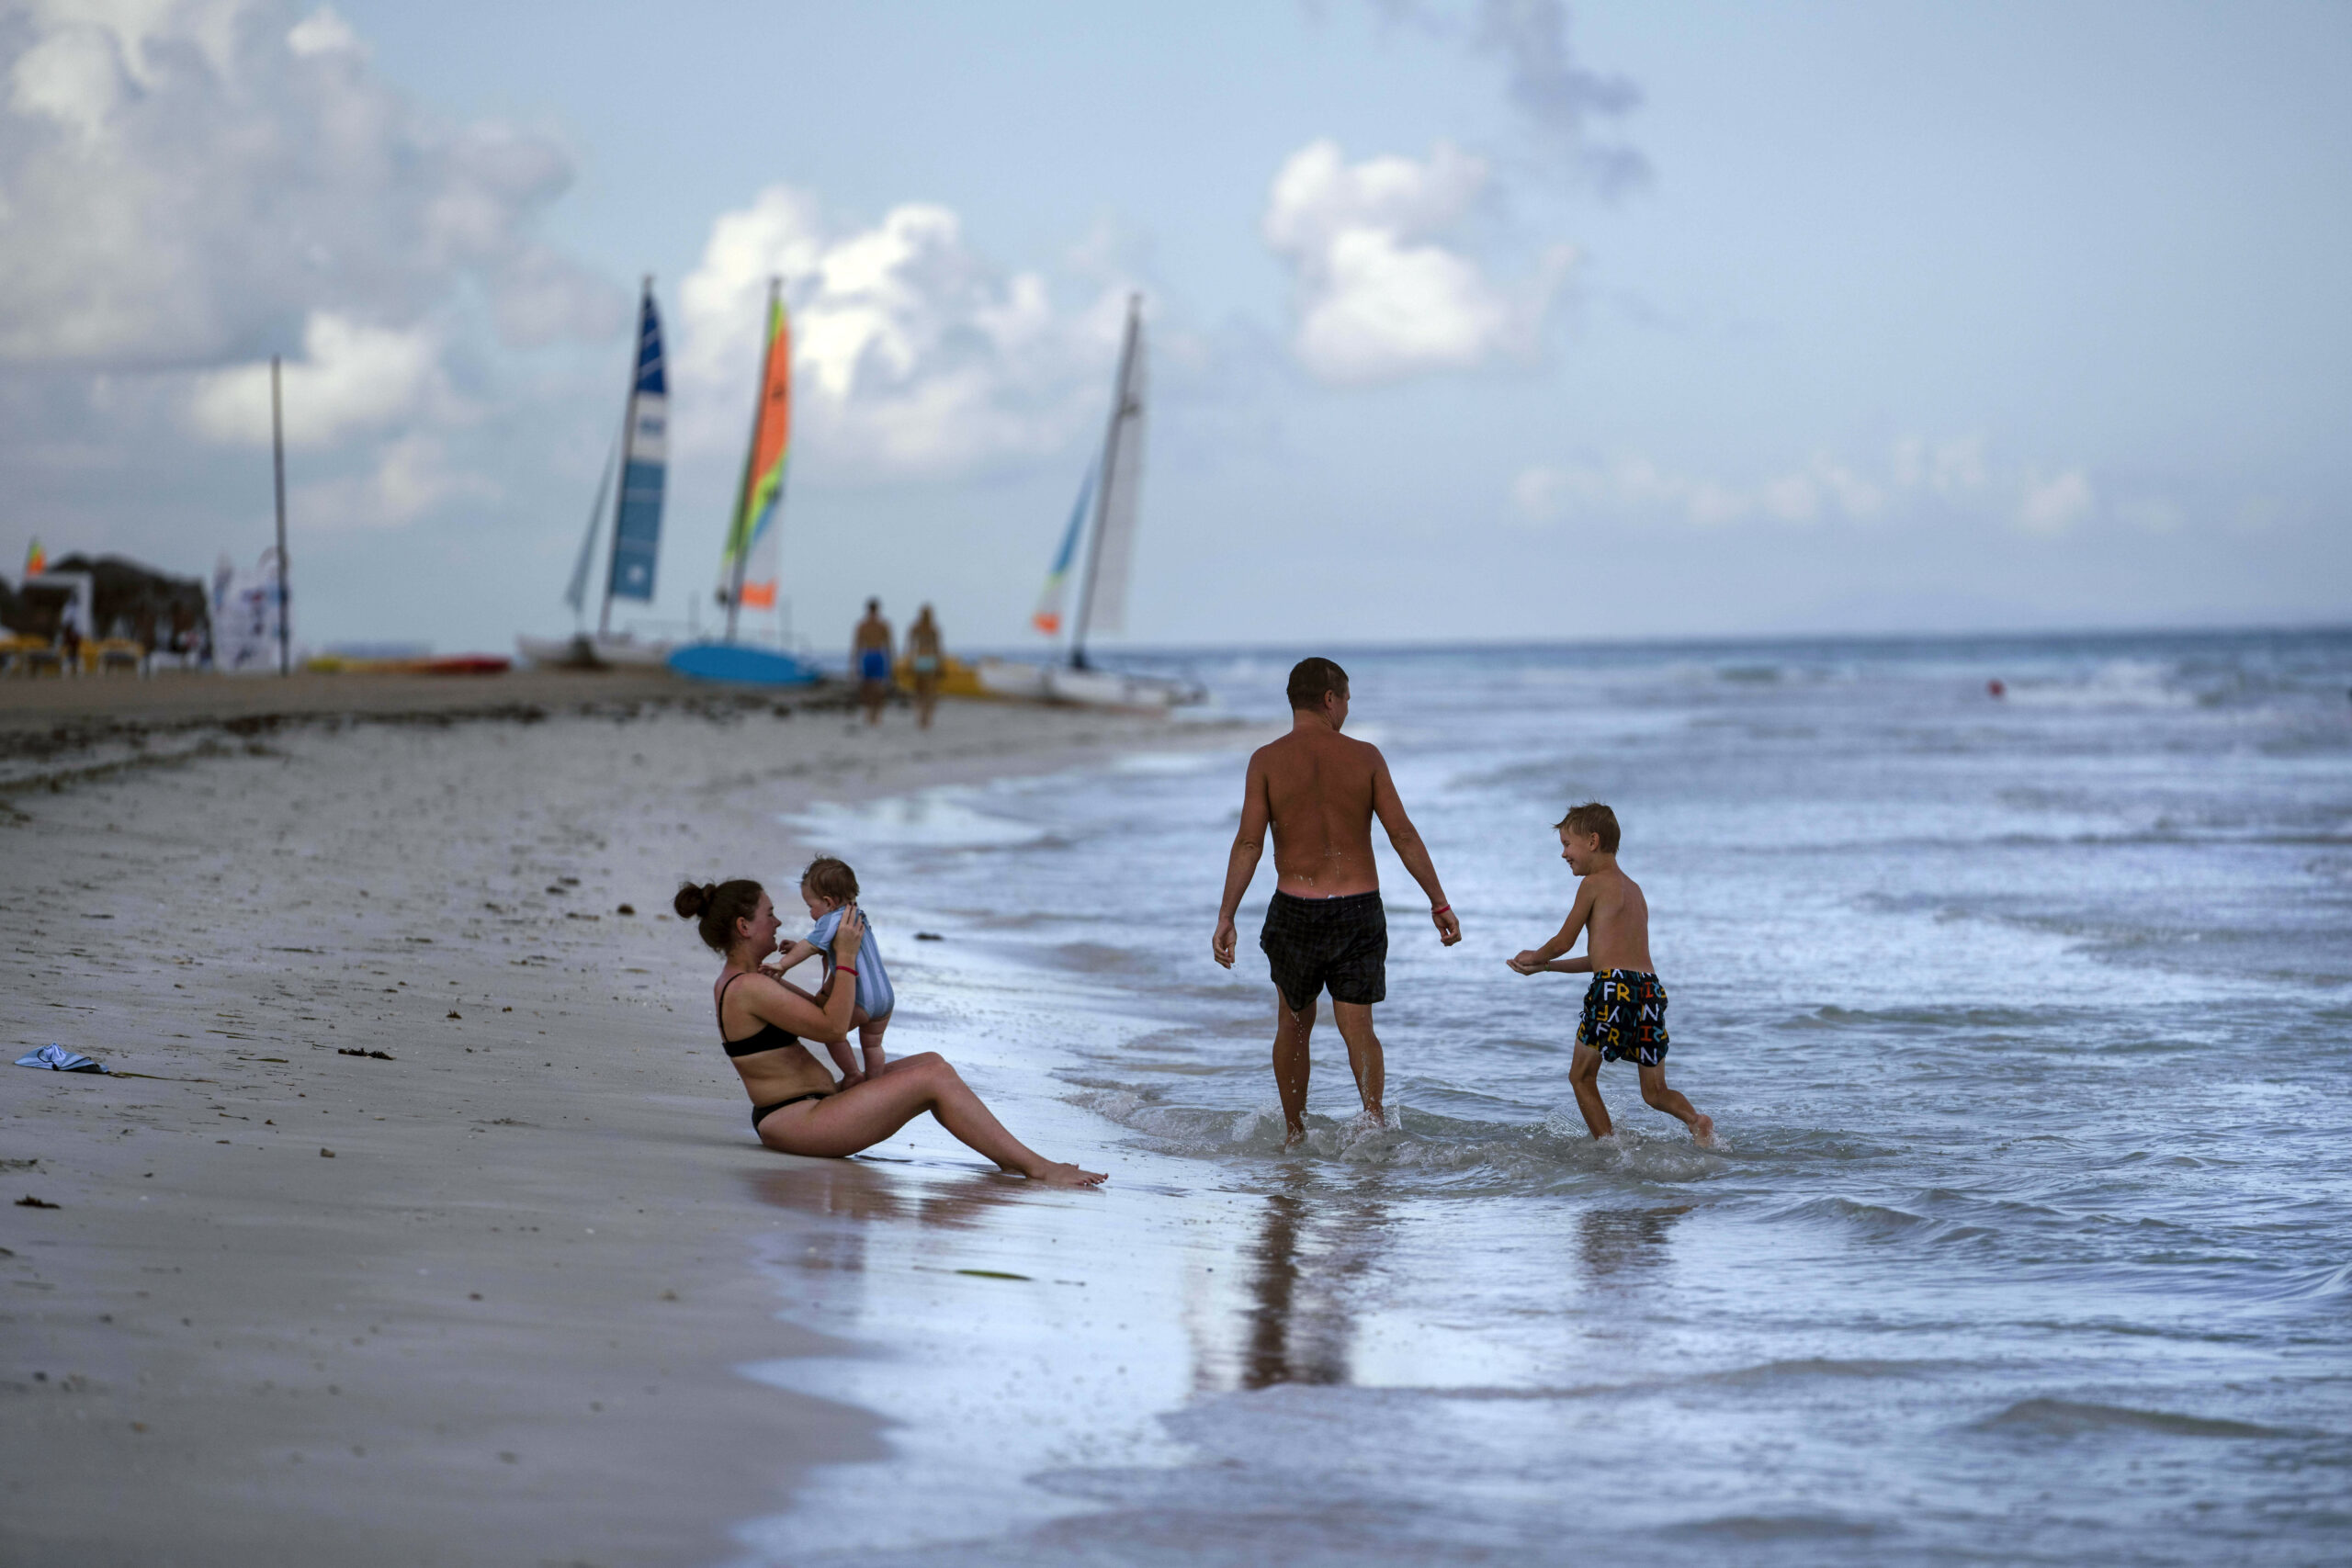 FILE - Tourists are seen along the beach at the Iberostar Selection Varadero hotel in Varadero, Cuba, on Sept. 29, 2021. The Biden administration announced Monday that it will expand flights to Cuba and lift Donald Trump-era restrictions on remittances that immigrants can send to people on the island. (AP Photo/Ramon Espinosa, File)